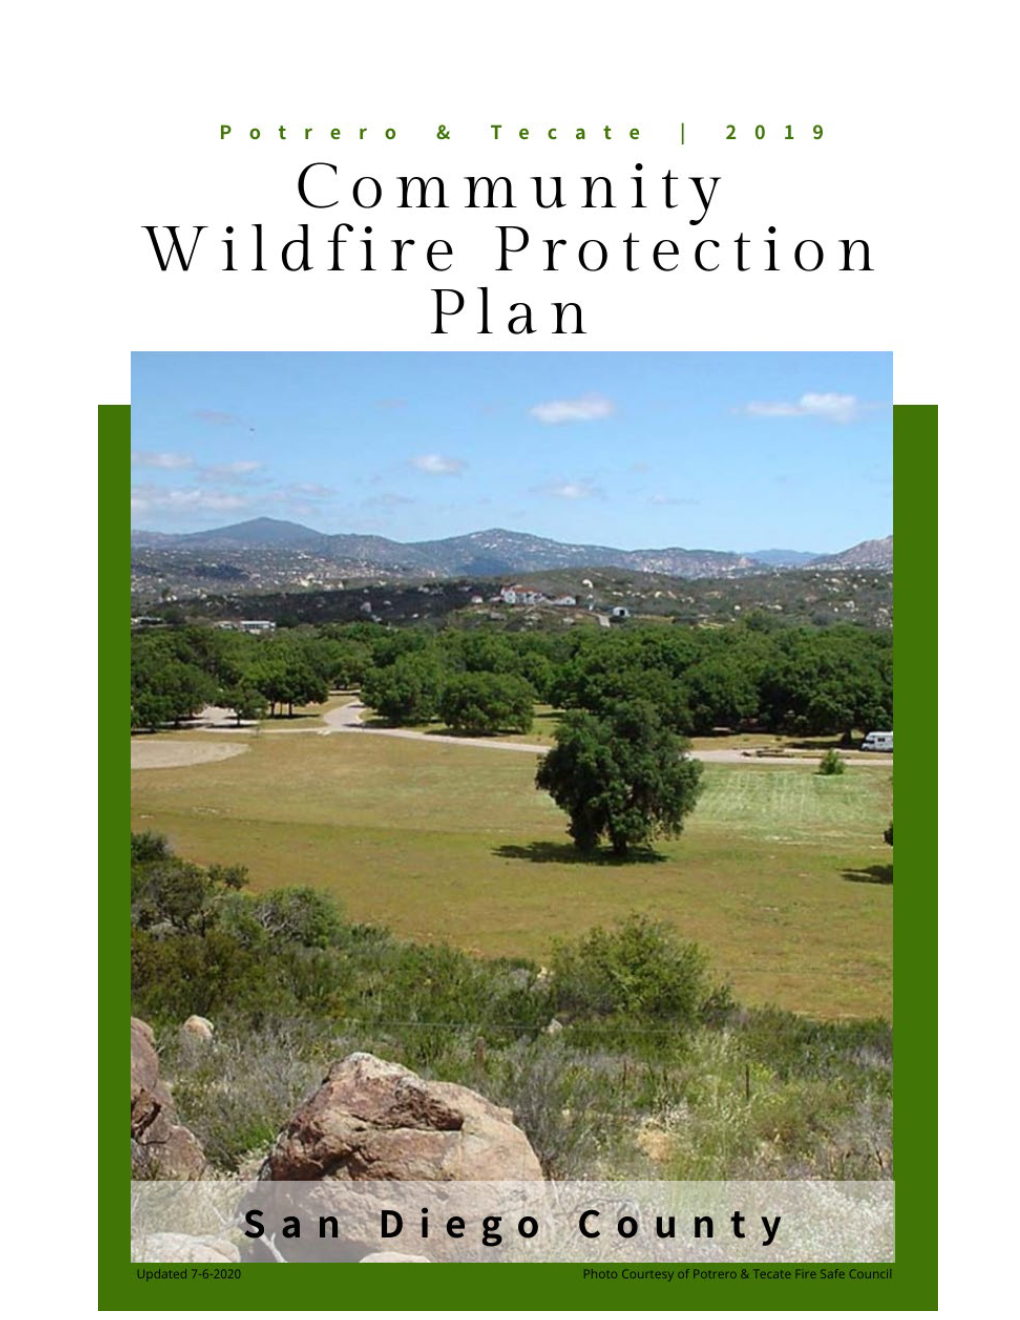 Community Wildfire Protection Plans (CWPP) Are Blueprints for Preparedness at the Neighborhood Level